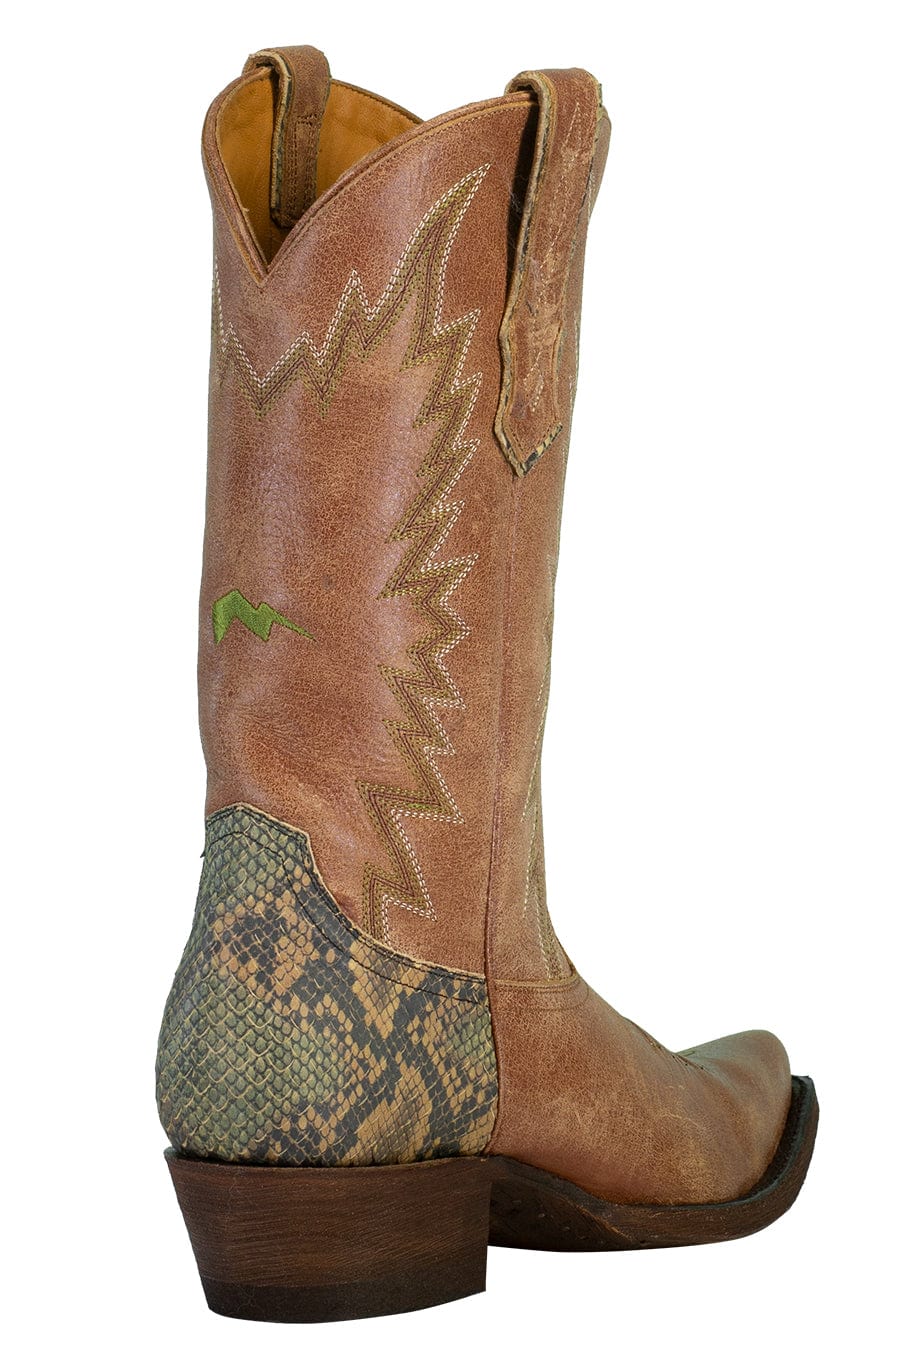 MIRONOVA-Cow Hide Leather Boot - Rust Snake-